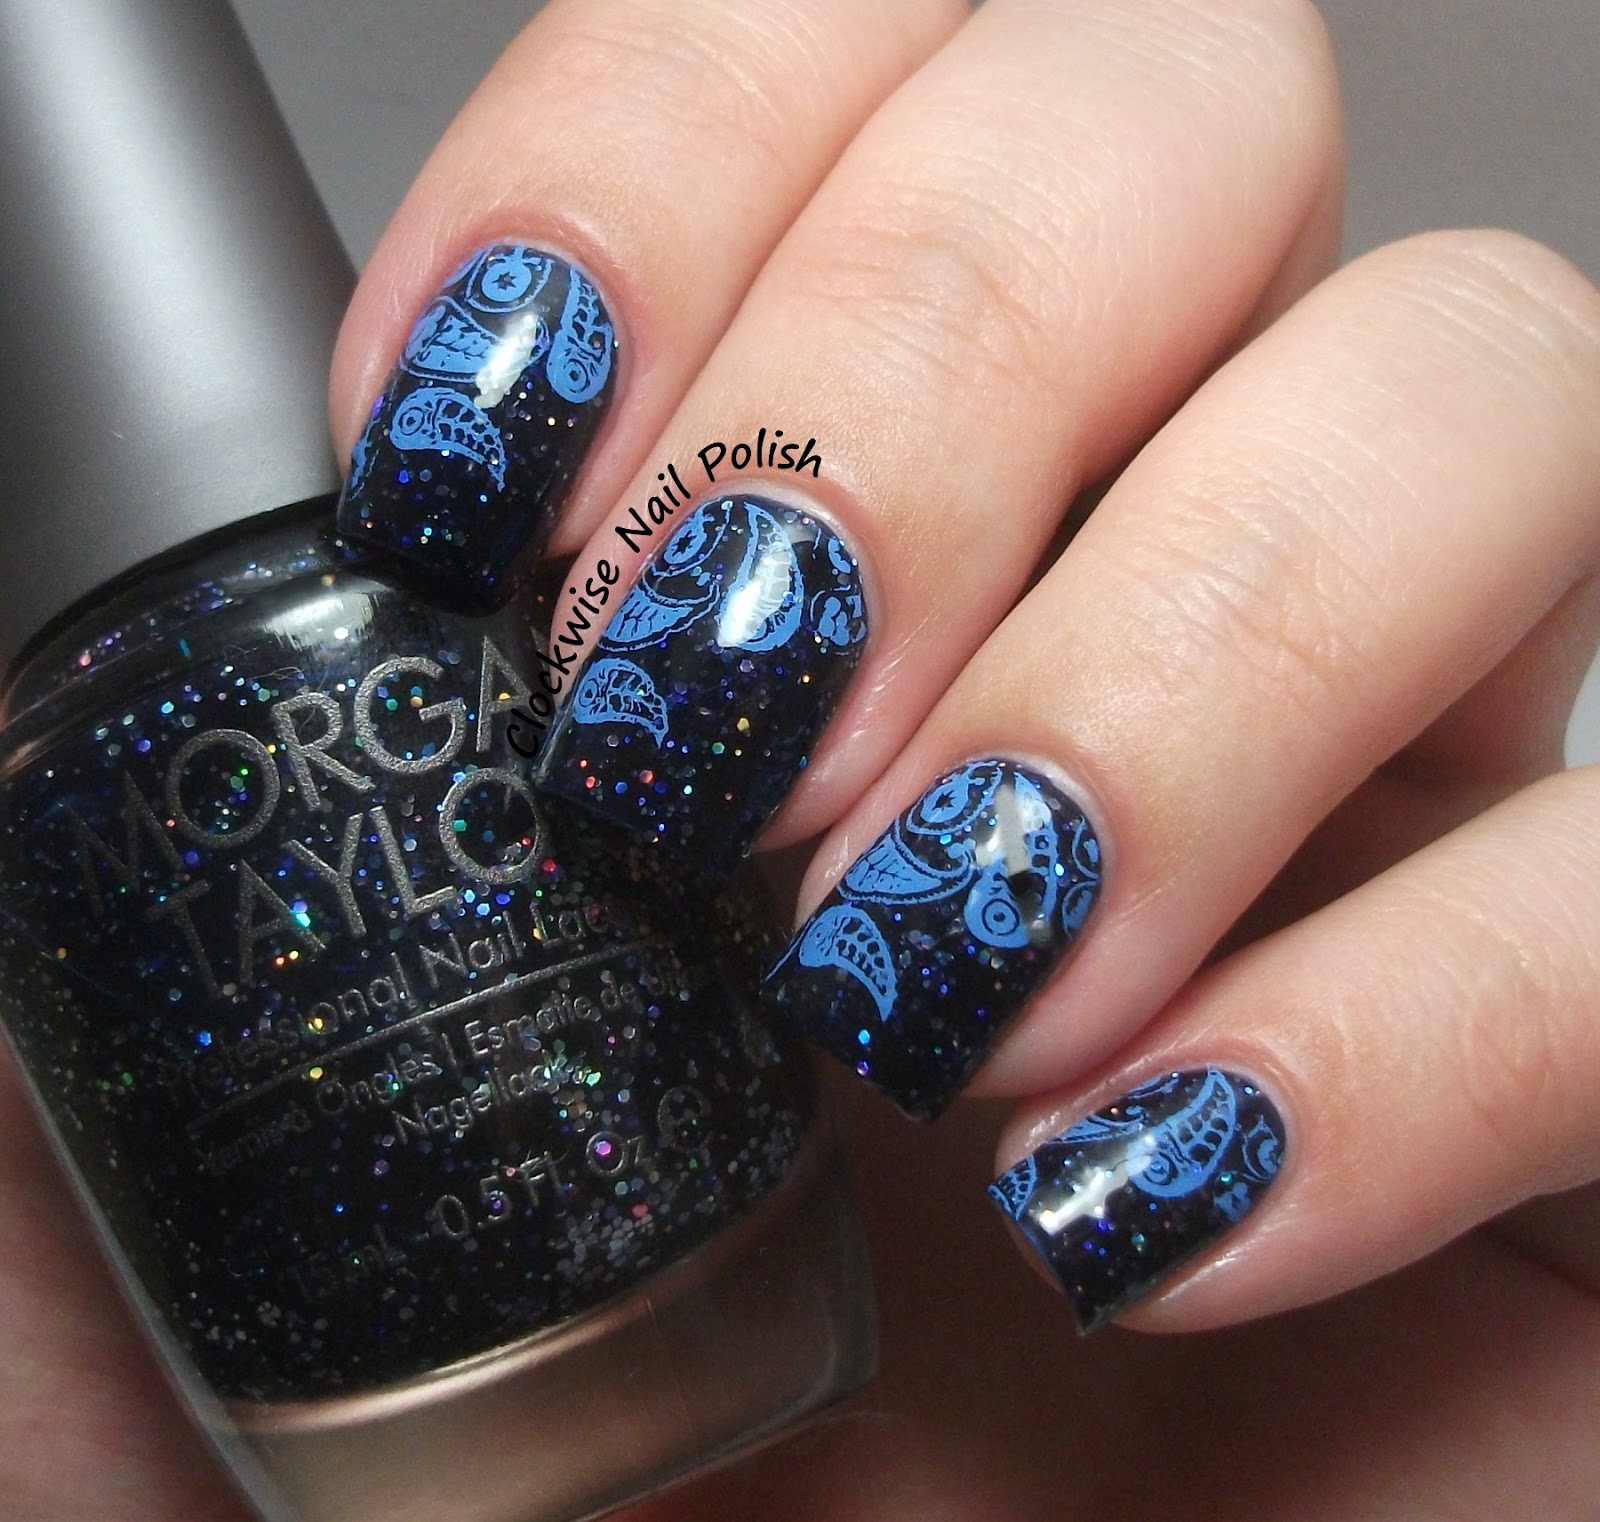 The Clockwise Nail Polish: Messy Mansion MM 48 Stamping Plate Review